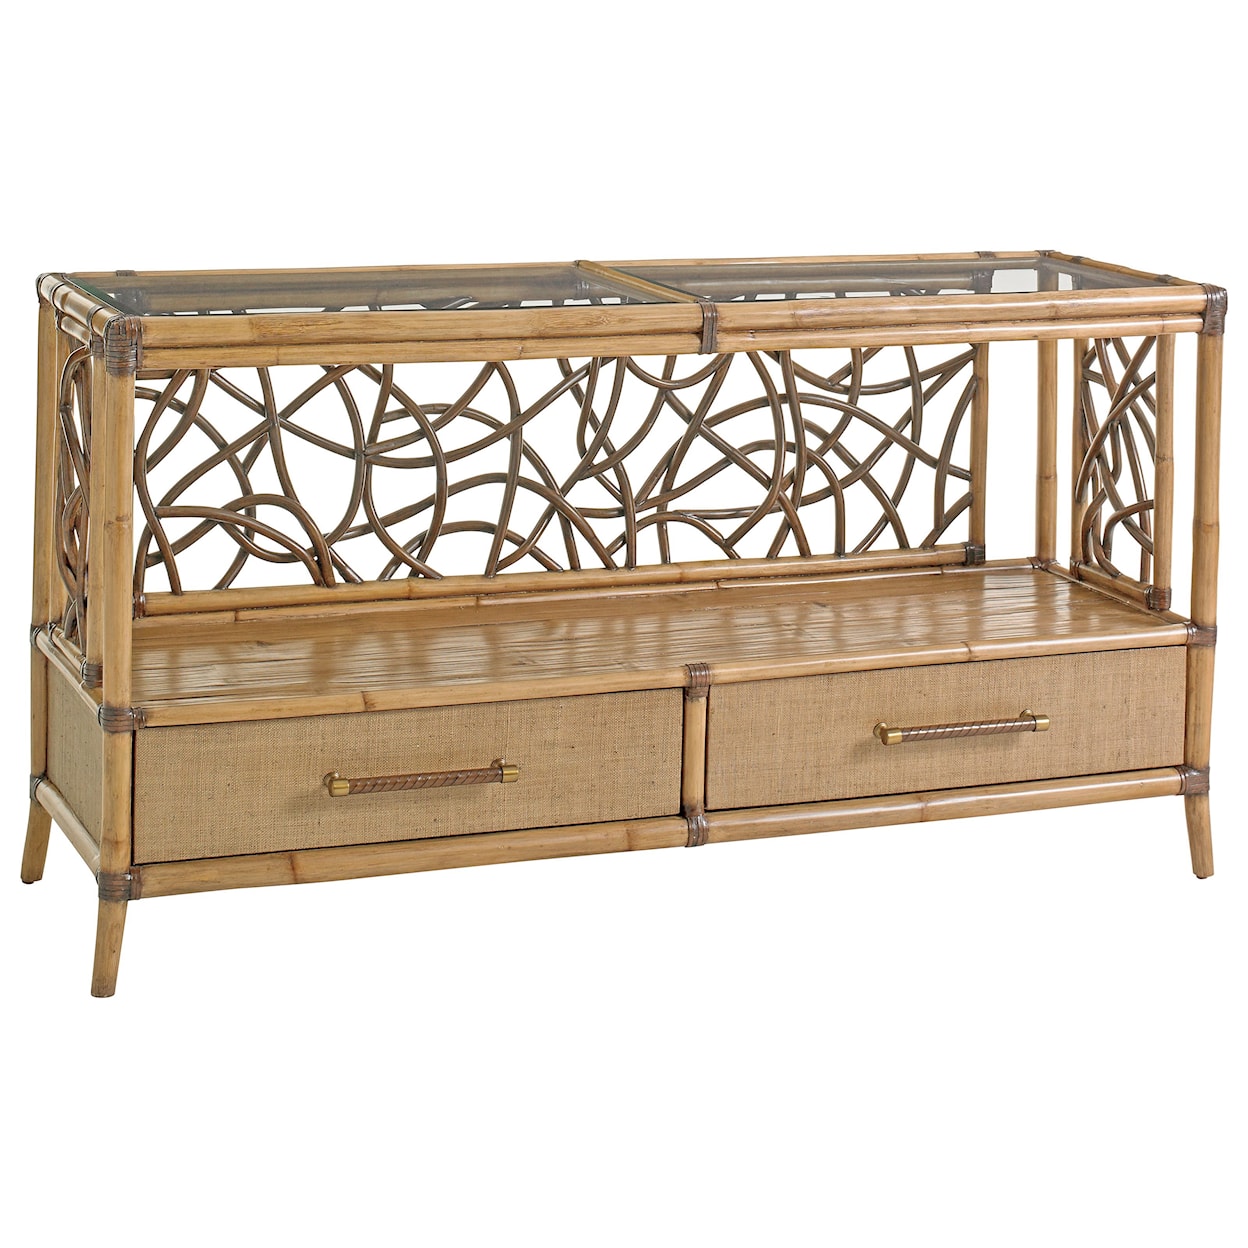 Tommy Bahama Home Twin Palms Sonesta Serving Console